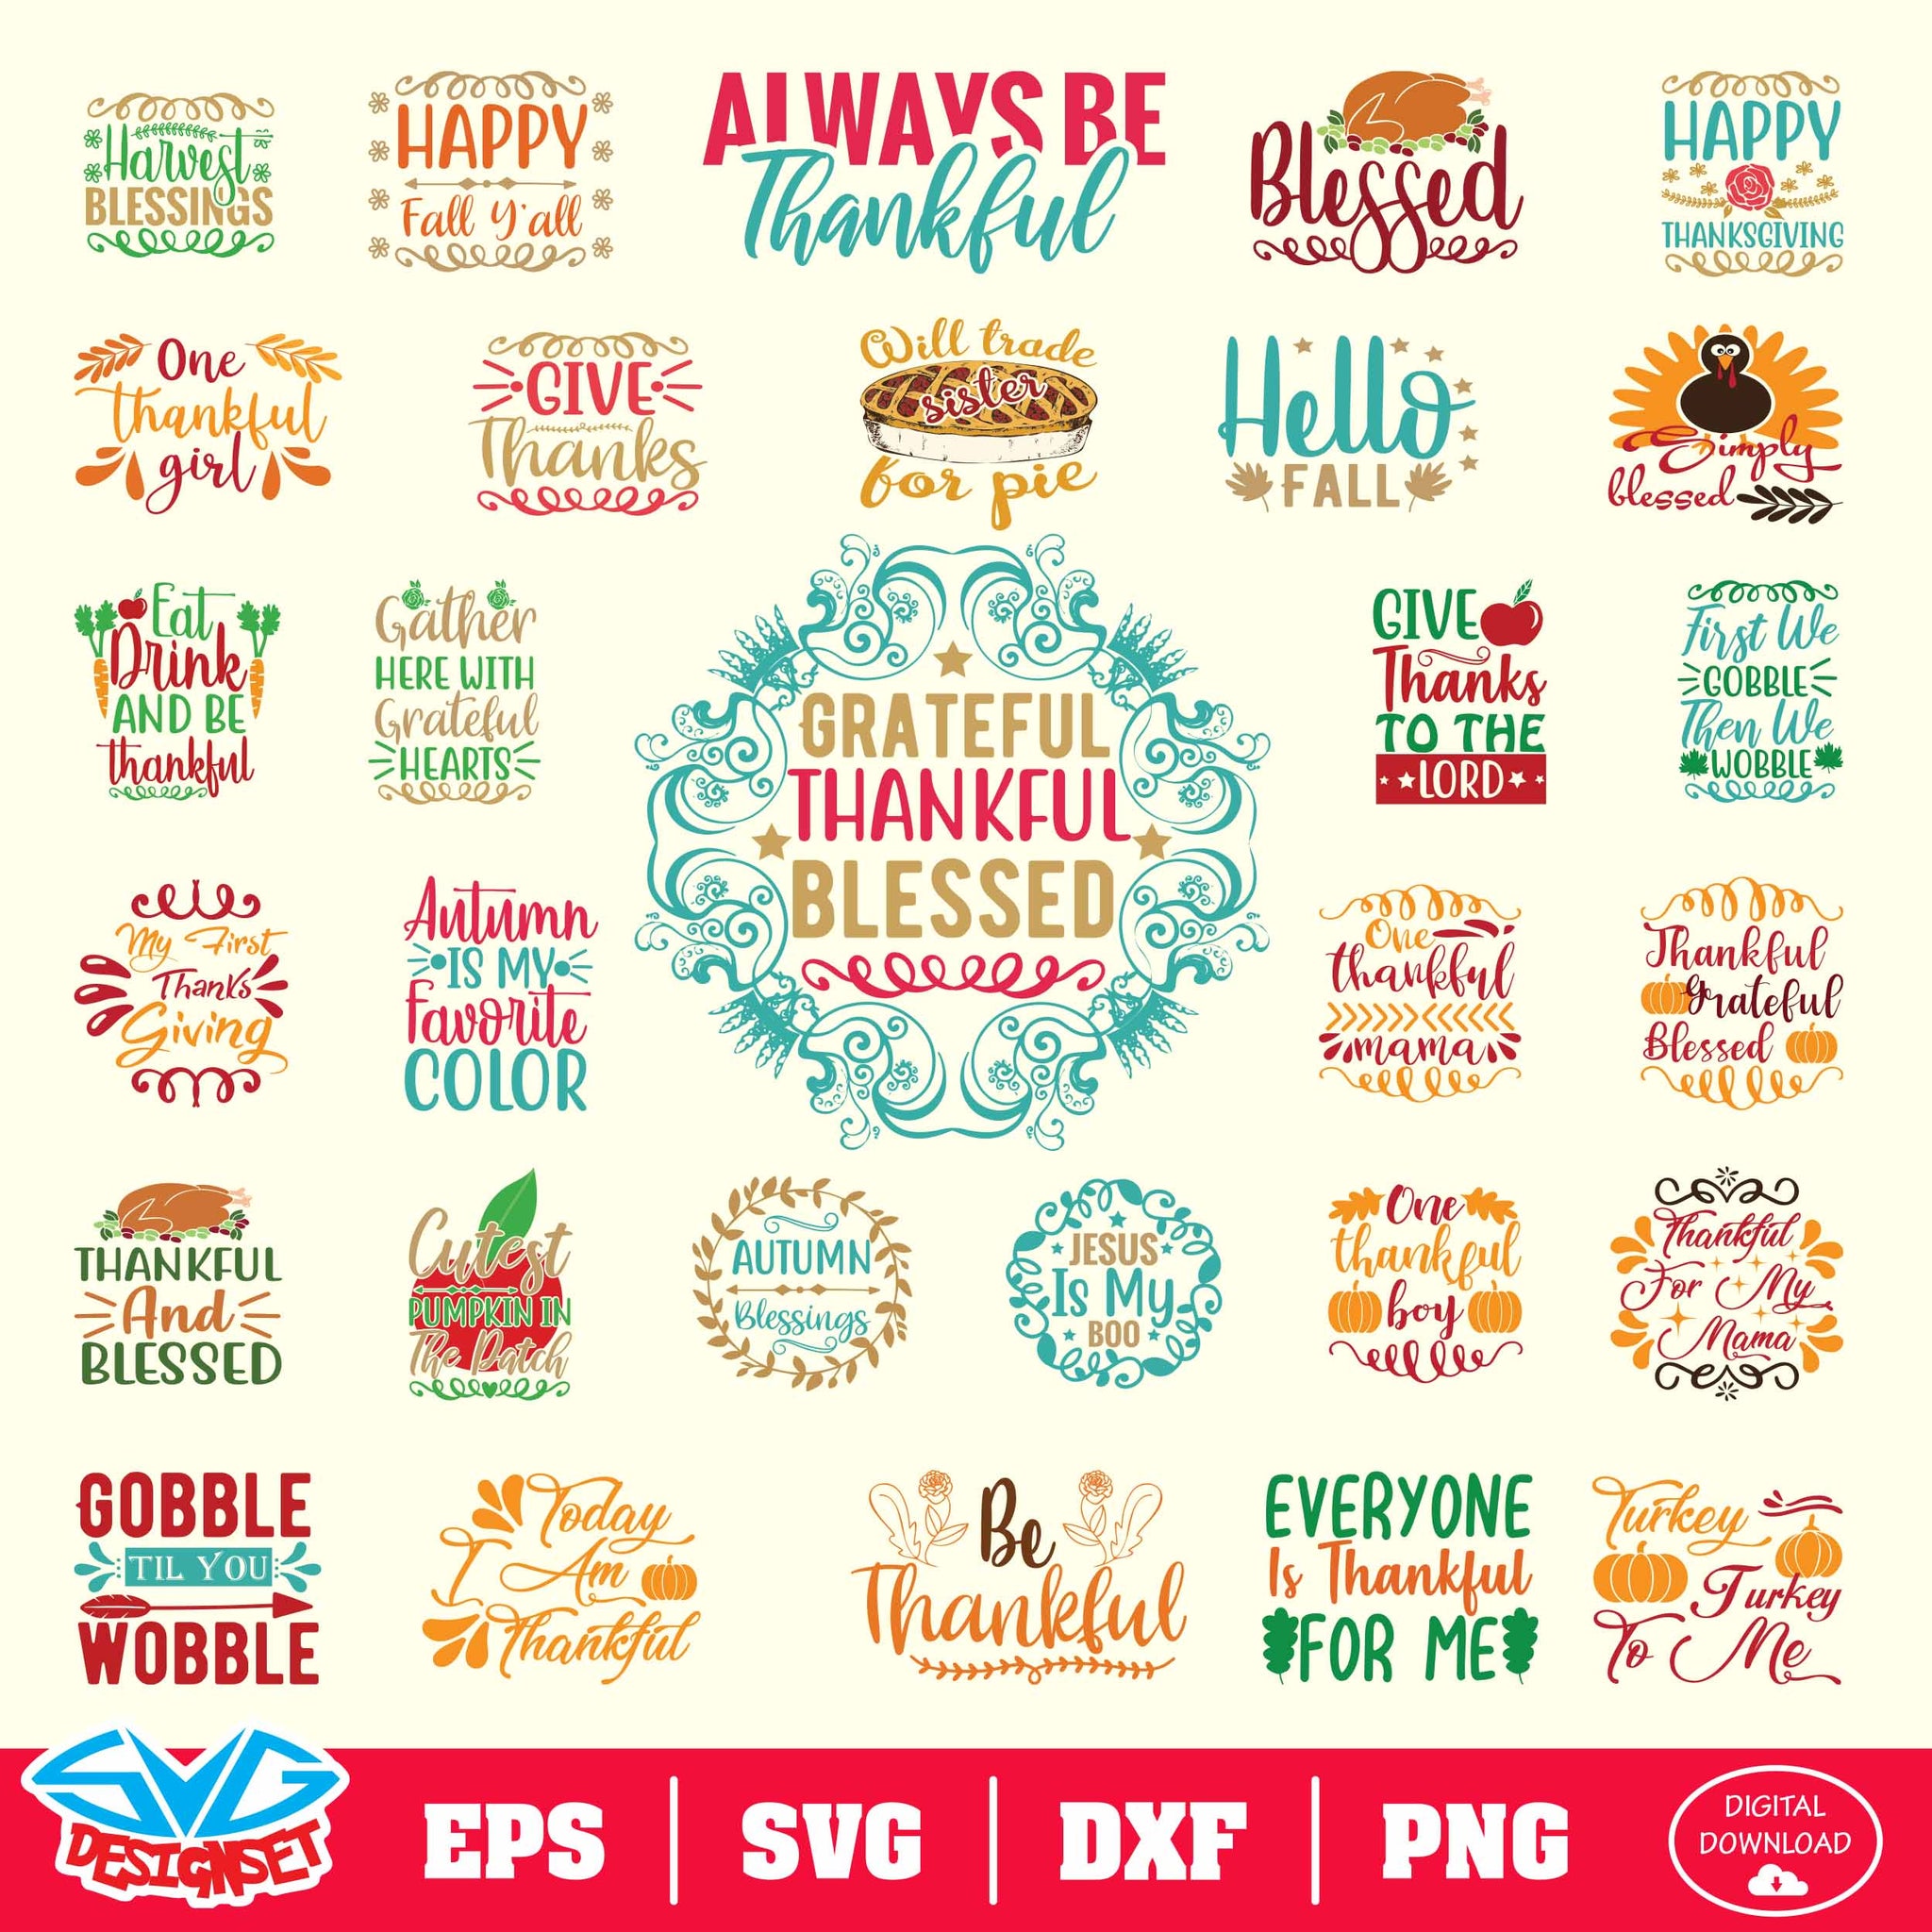 Thanksgiving Svg, Dxf, Eps, Png, Clipart, Silhouette and Cutfiles #003 - SVGDesignSets